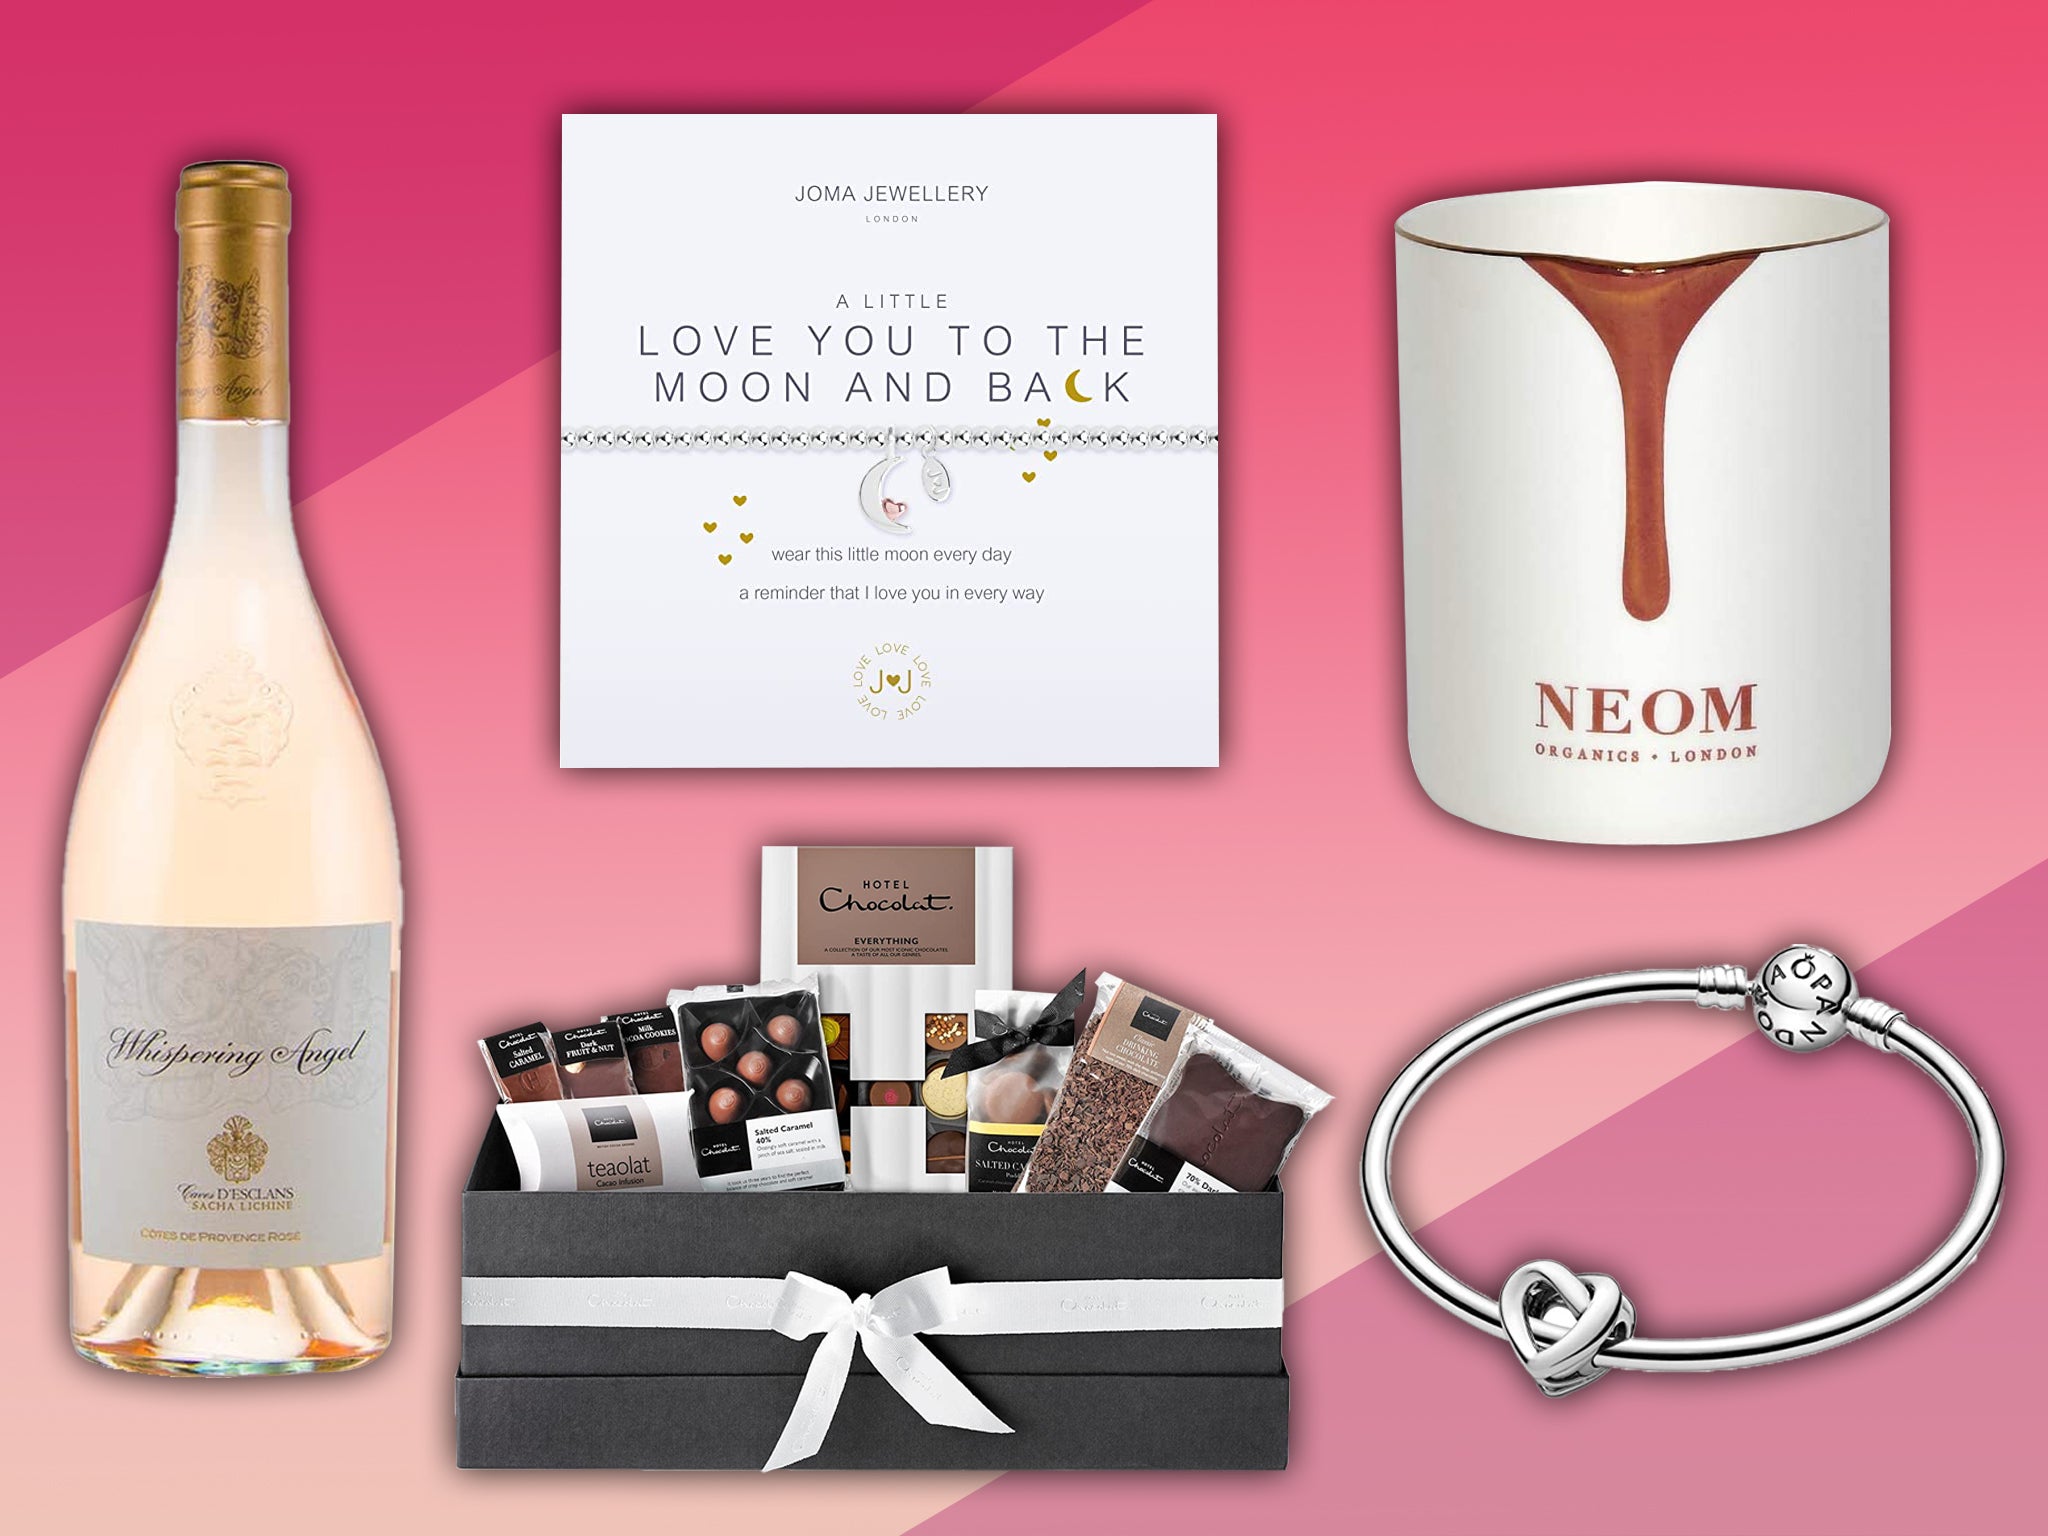 Wine, chocolates, jewellery, candles... you can’t go wrong